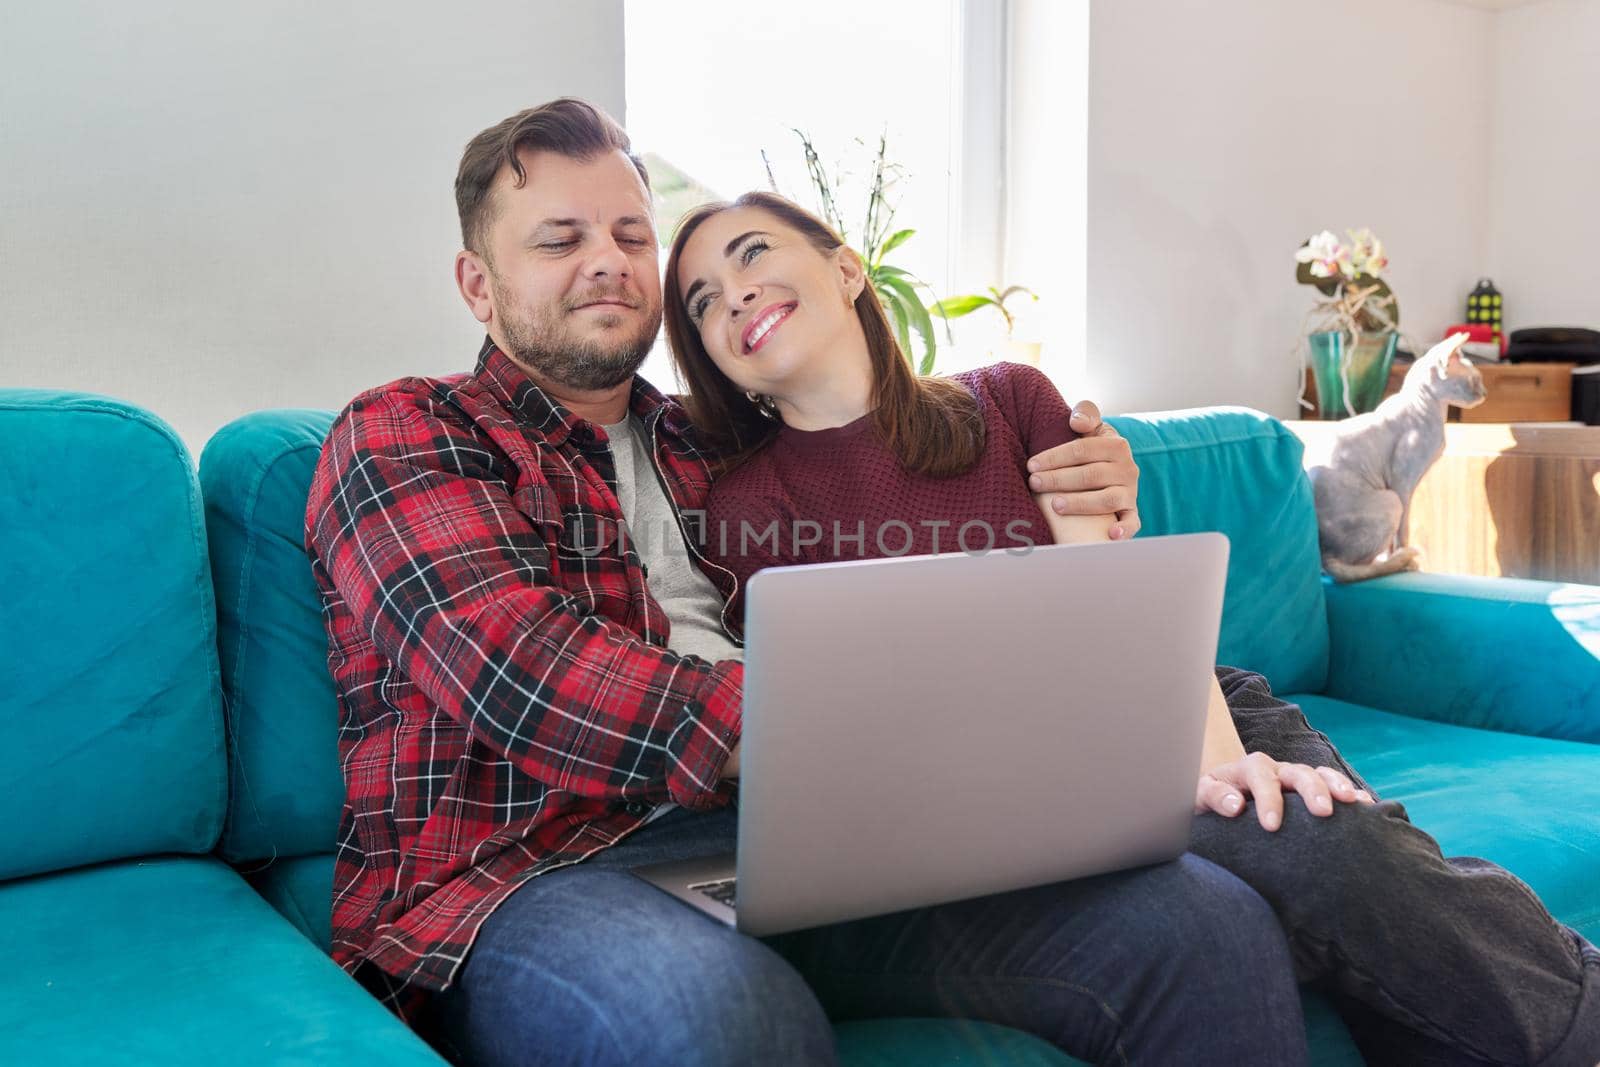 Happy smiling middle aged family couple looking at laptop screen together while sitting on sofa at home with pet cat. Relationships, lifestyle, family, leisure, technology, rest, people 40s concept